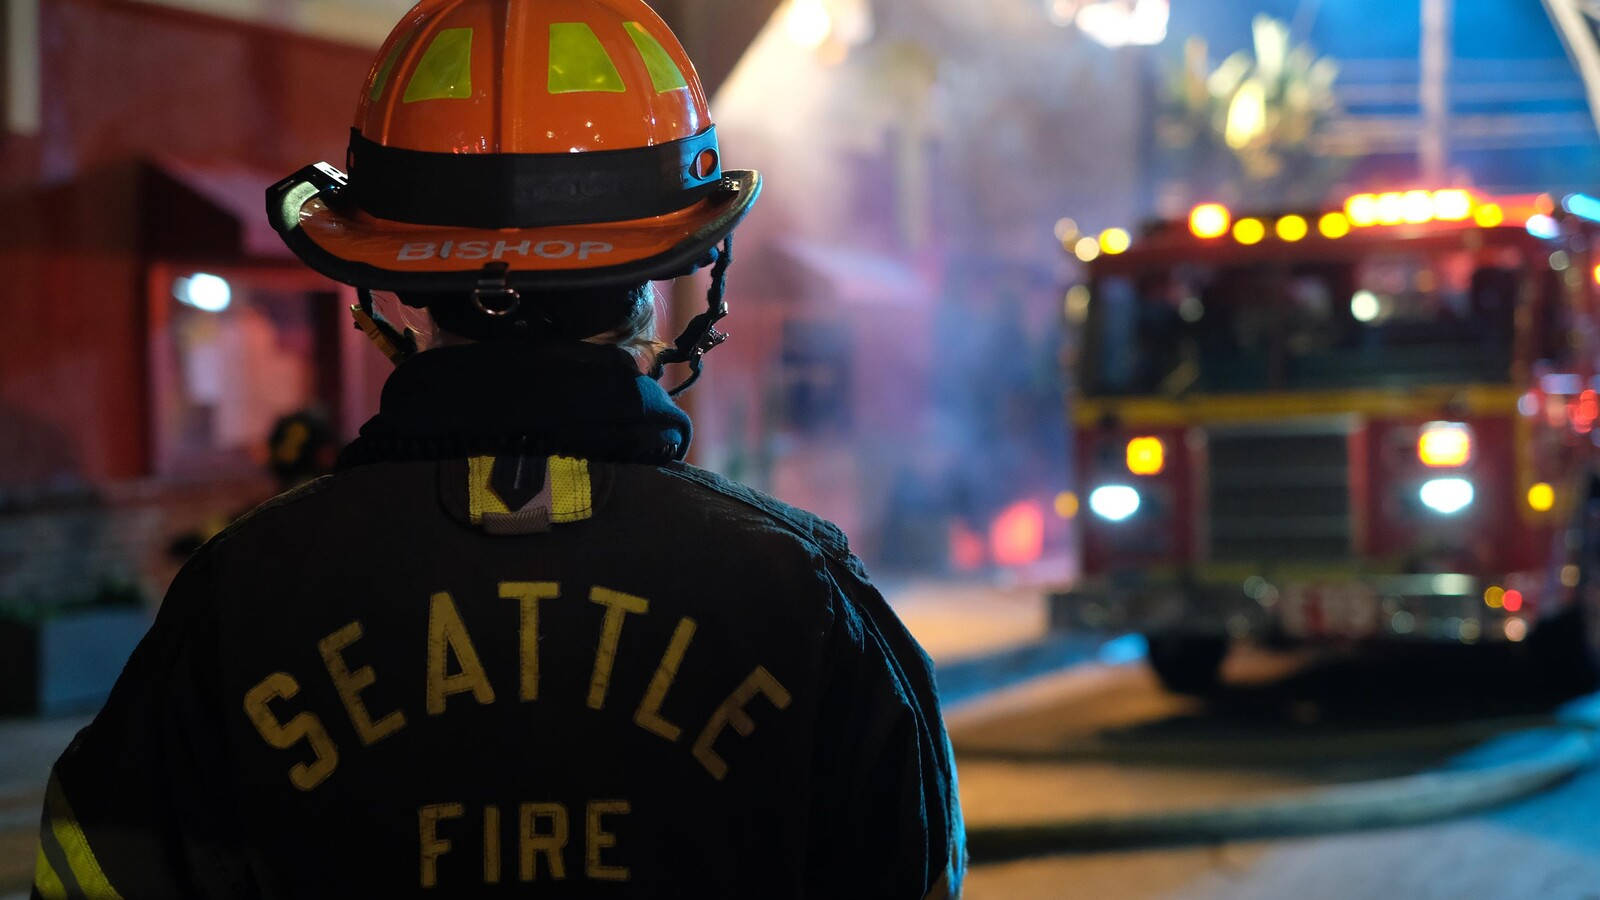 Caption: The Vibrant Seattle Fire Department Station 19 Background